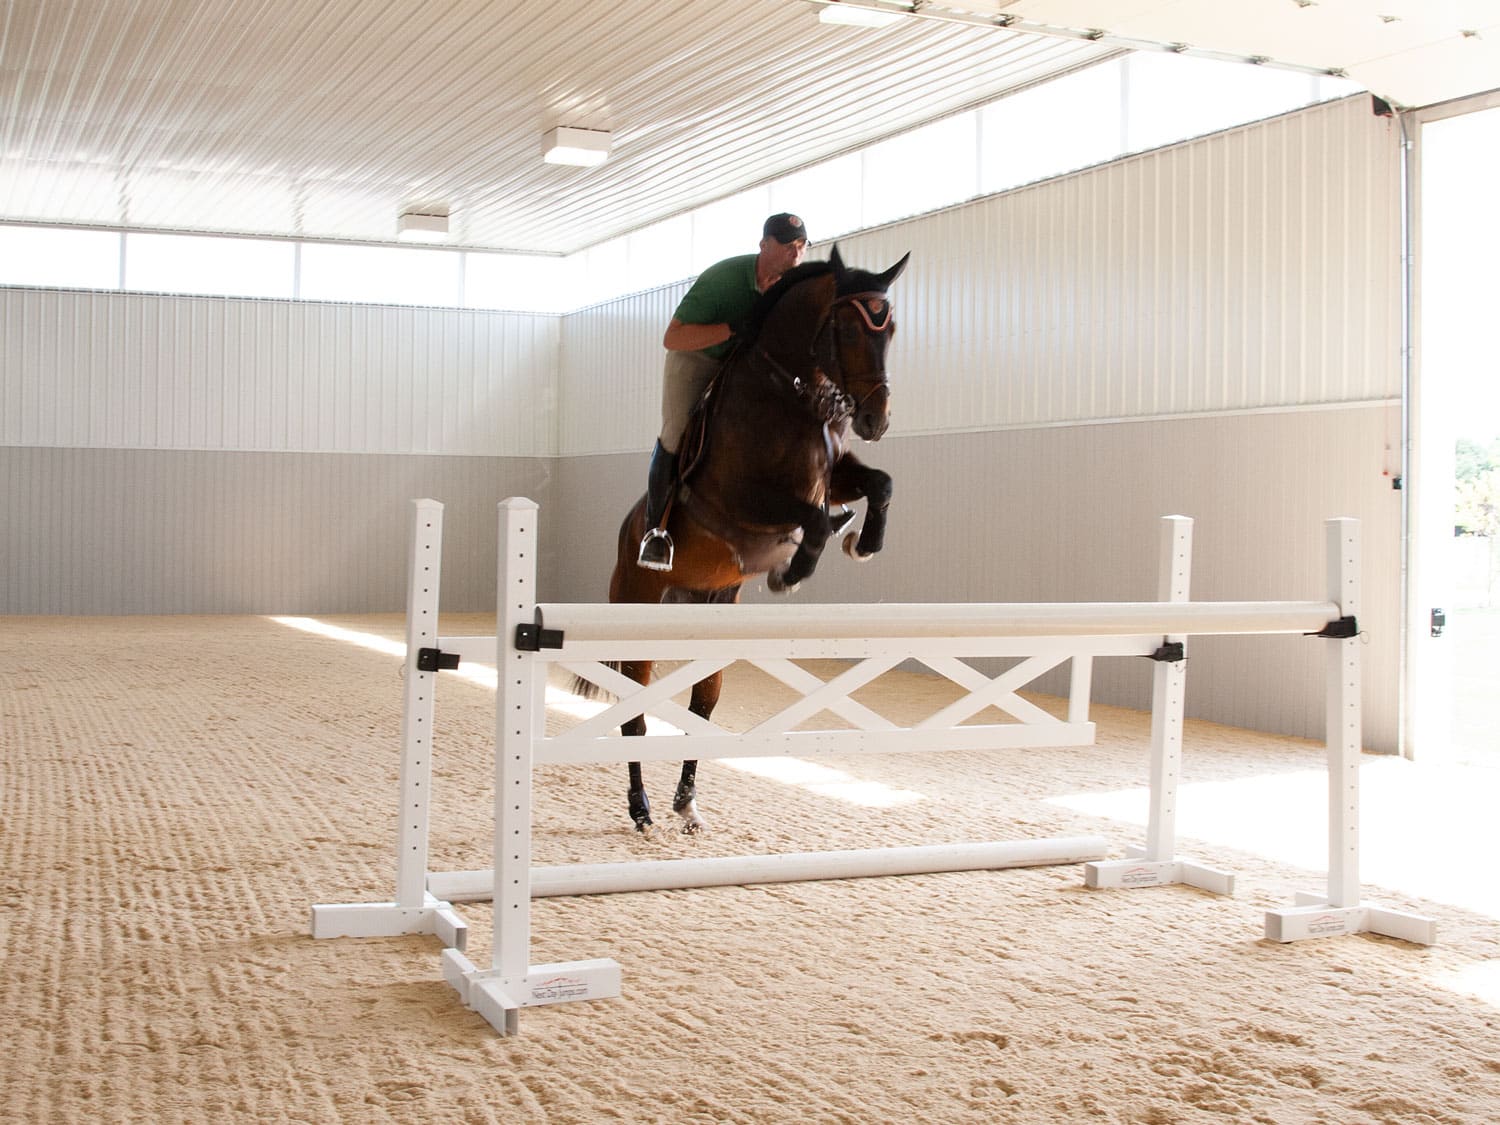 Jumping on ThorTurf arena footing indoor